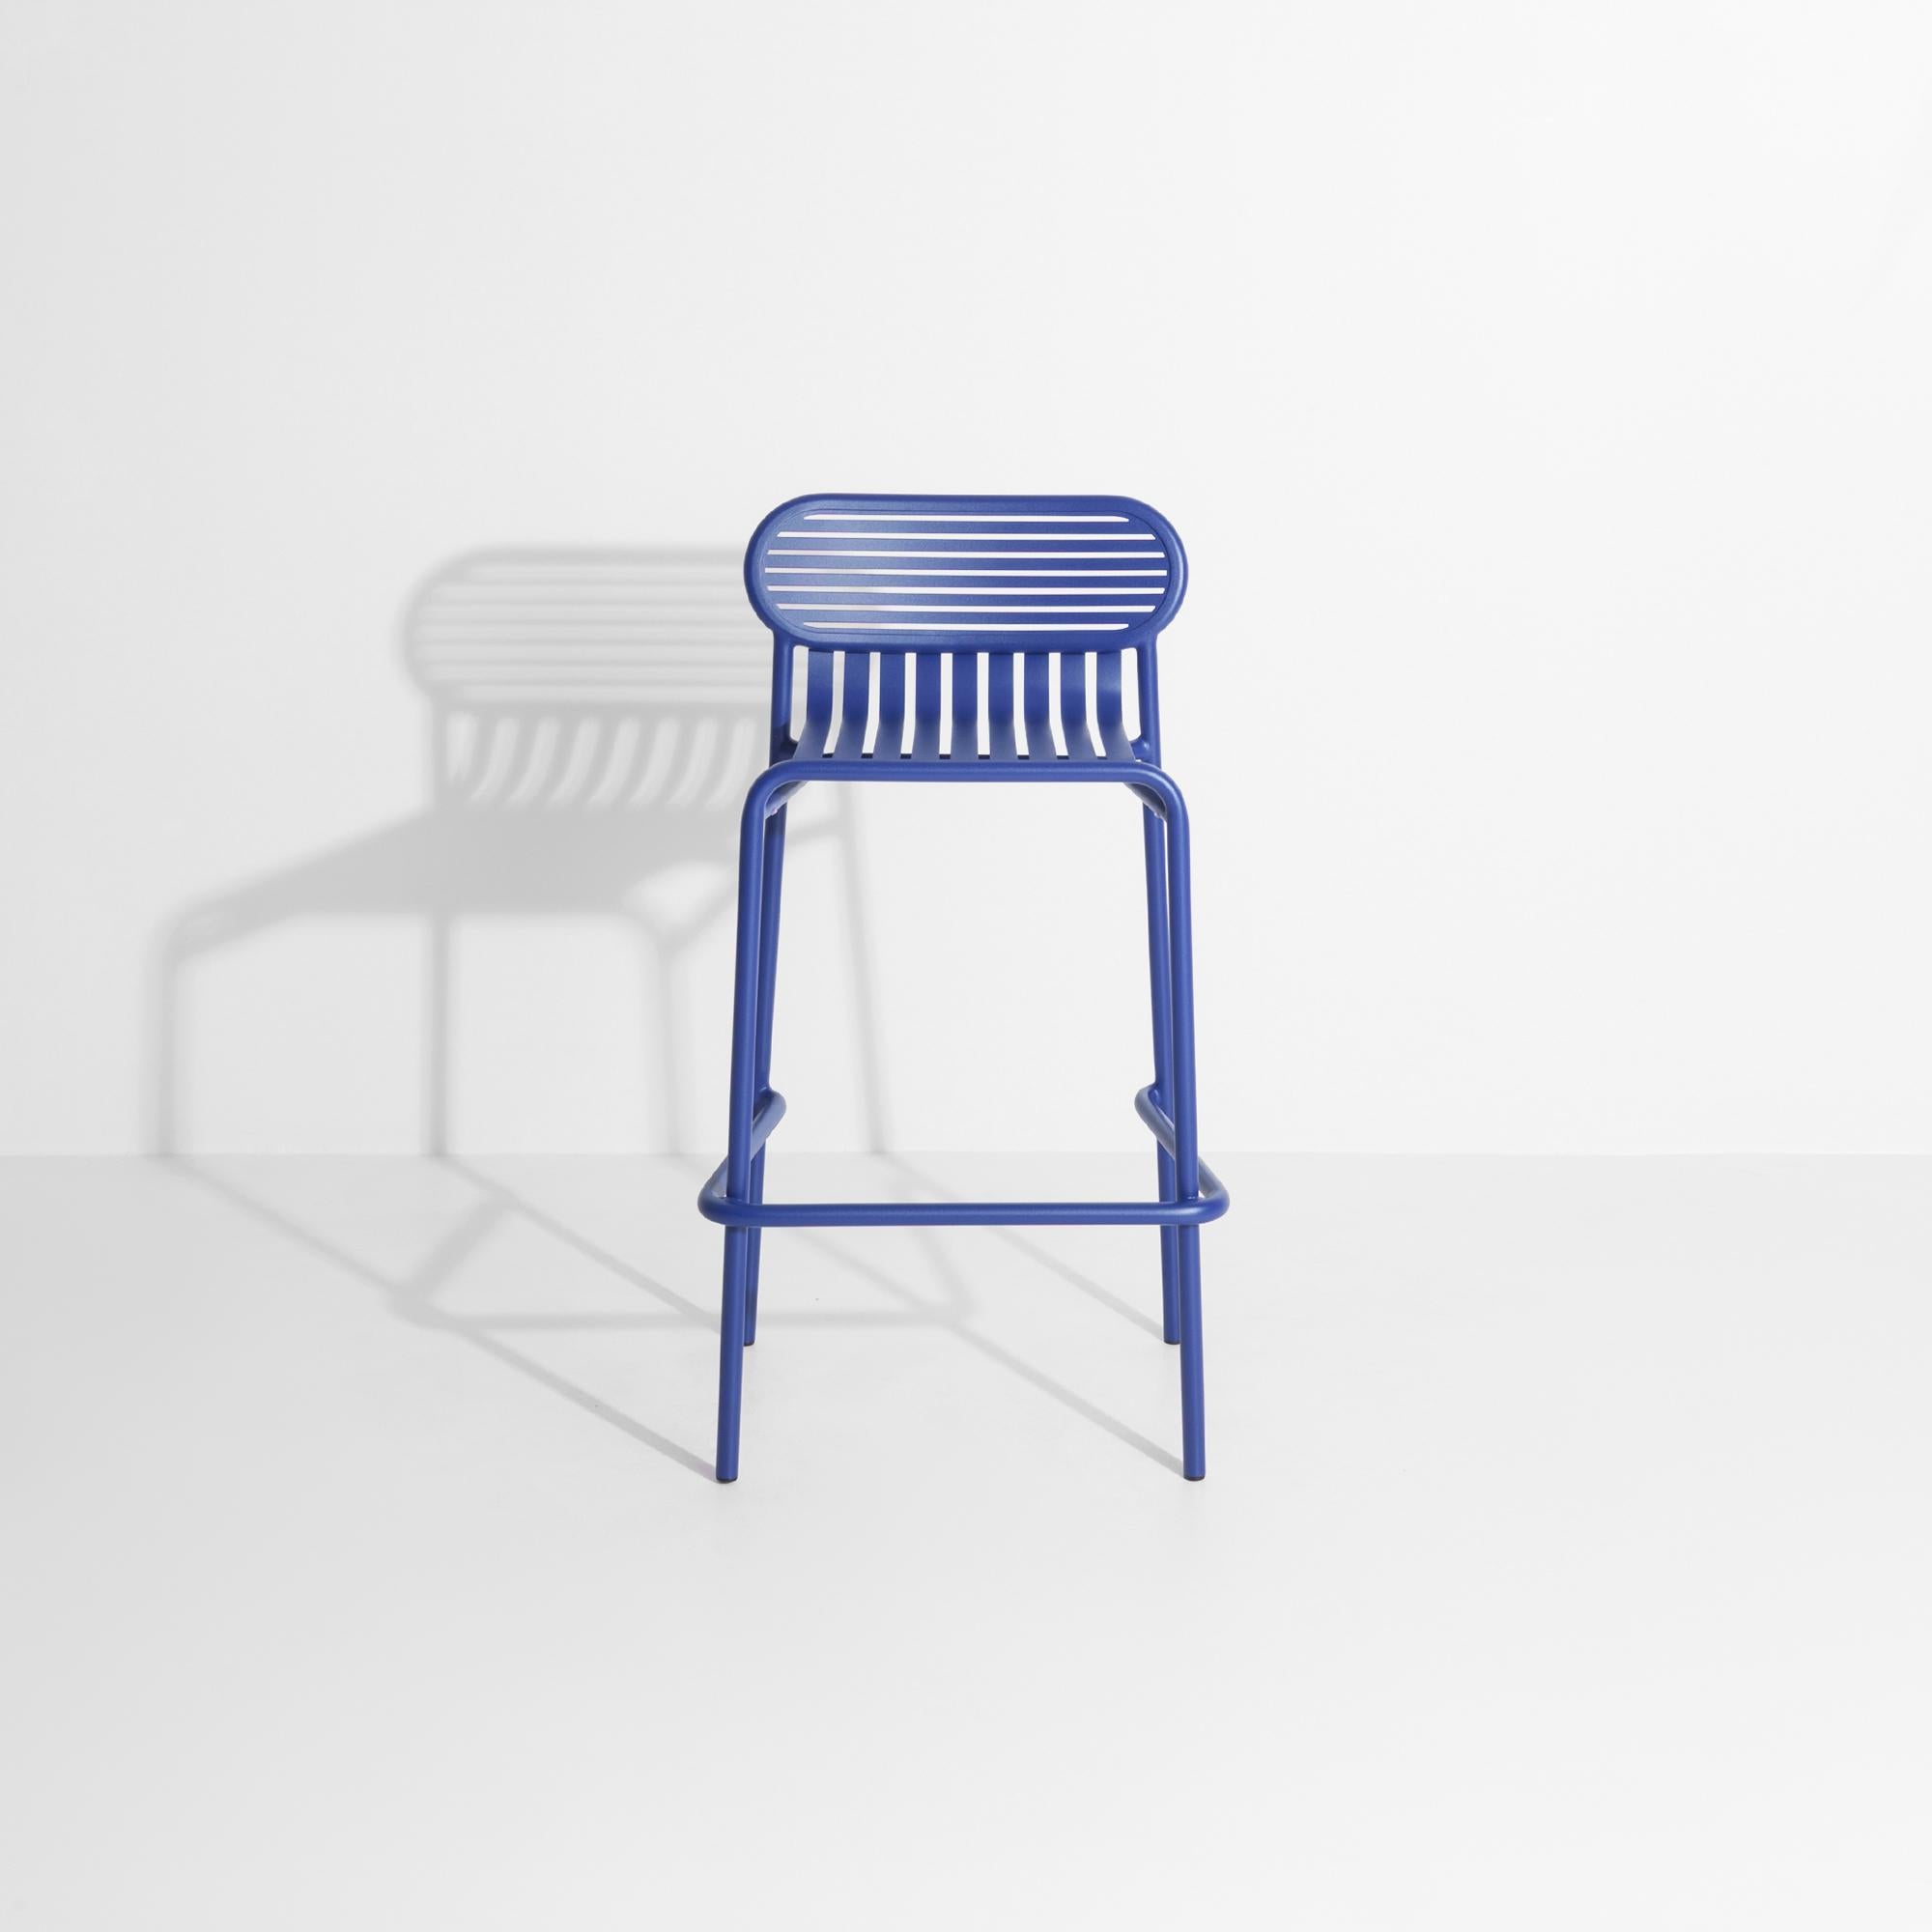 Petite Friture Week-End Bar Stool in Blue Aluminium by Studio BrichetZiegler In New Condition For Sale In Brooklyn, NY